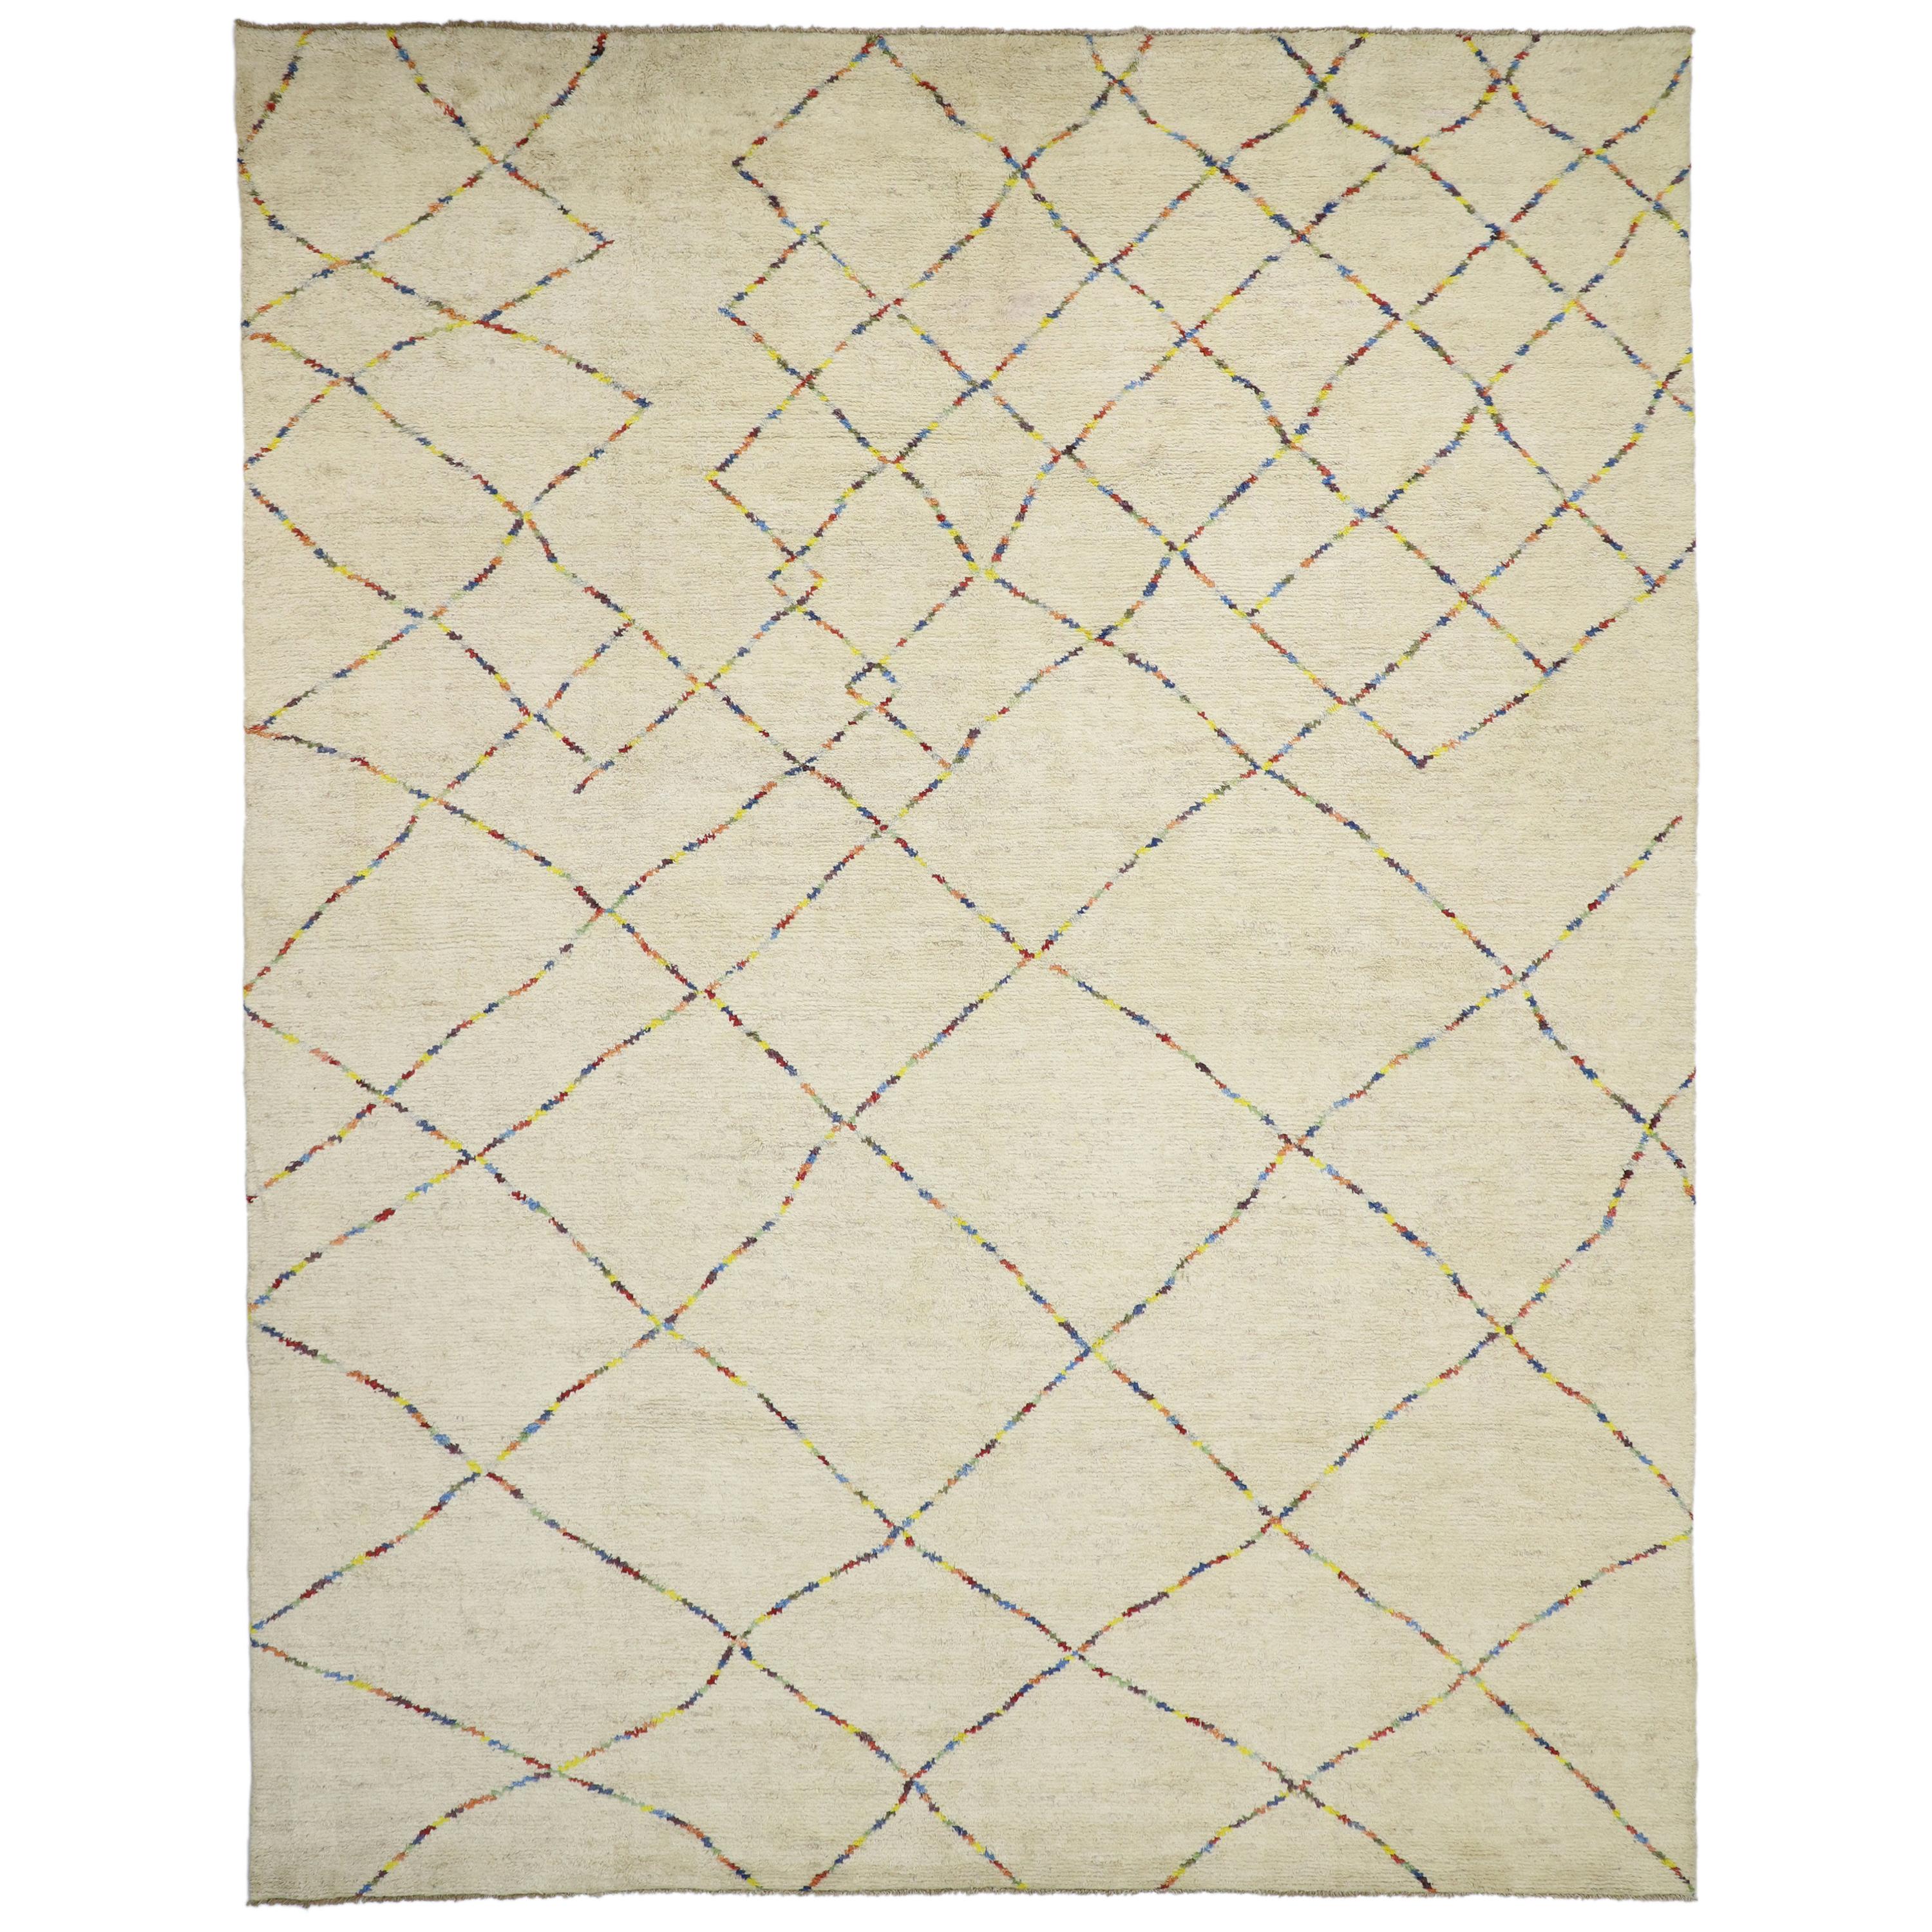 Contemporary Moroccan Style Rug with Organic Modern Style